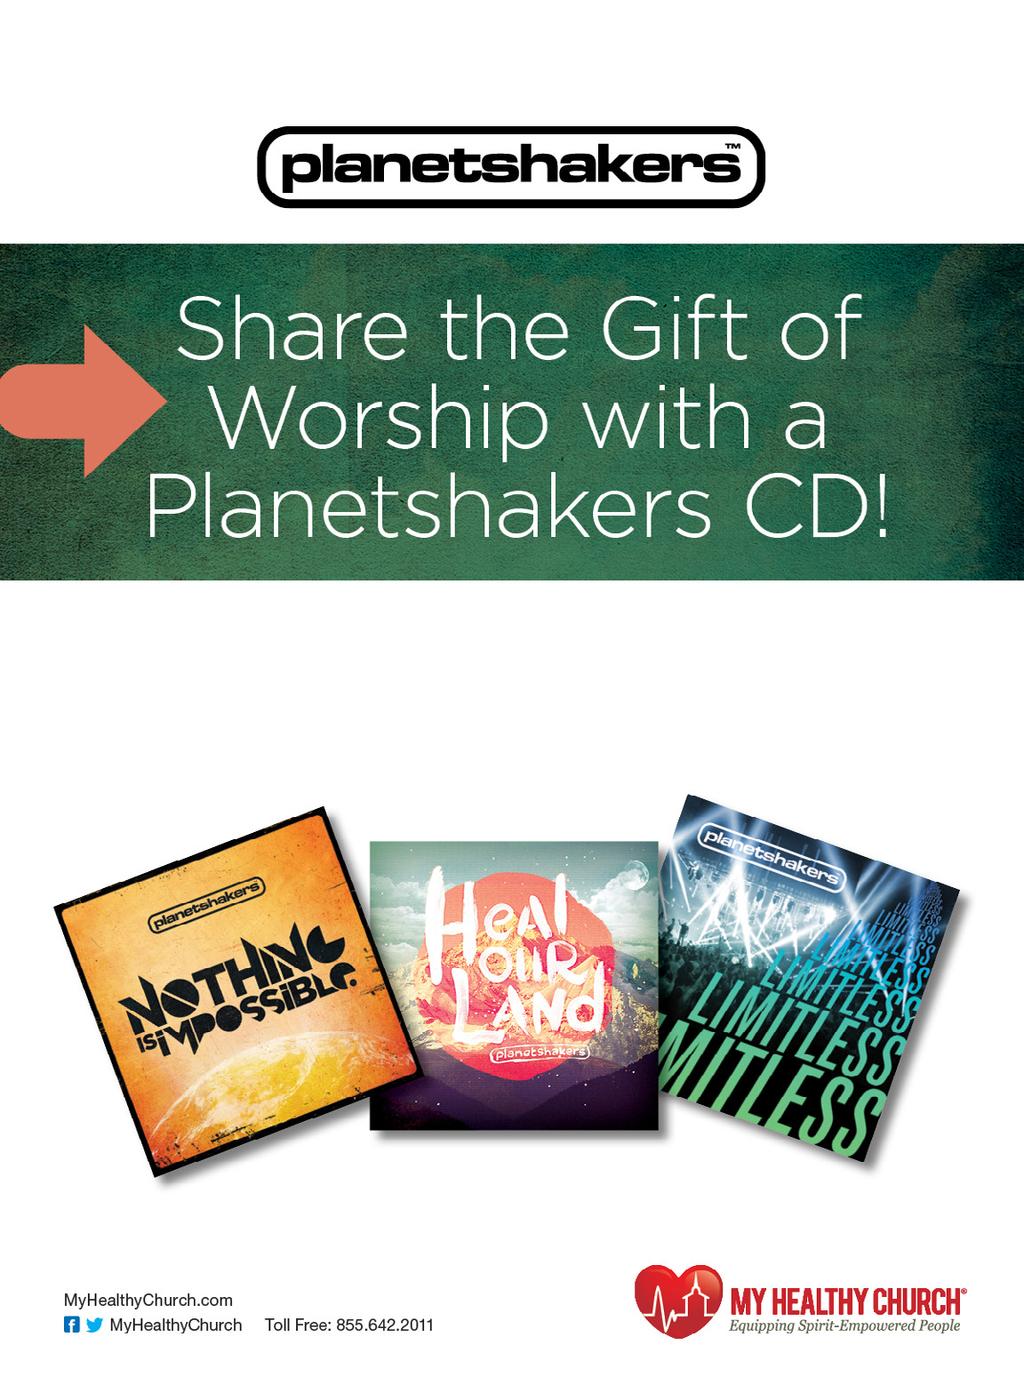 Kindle the Fire with inspiring worship music that has challenged, stirred and touched millions.